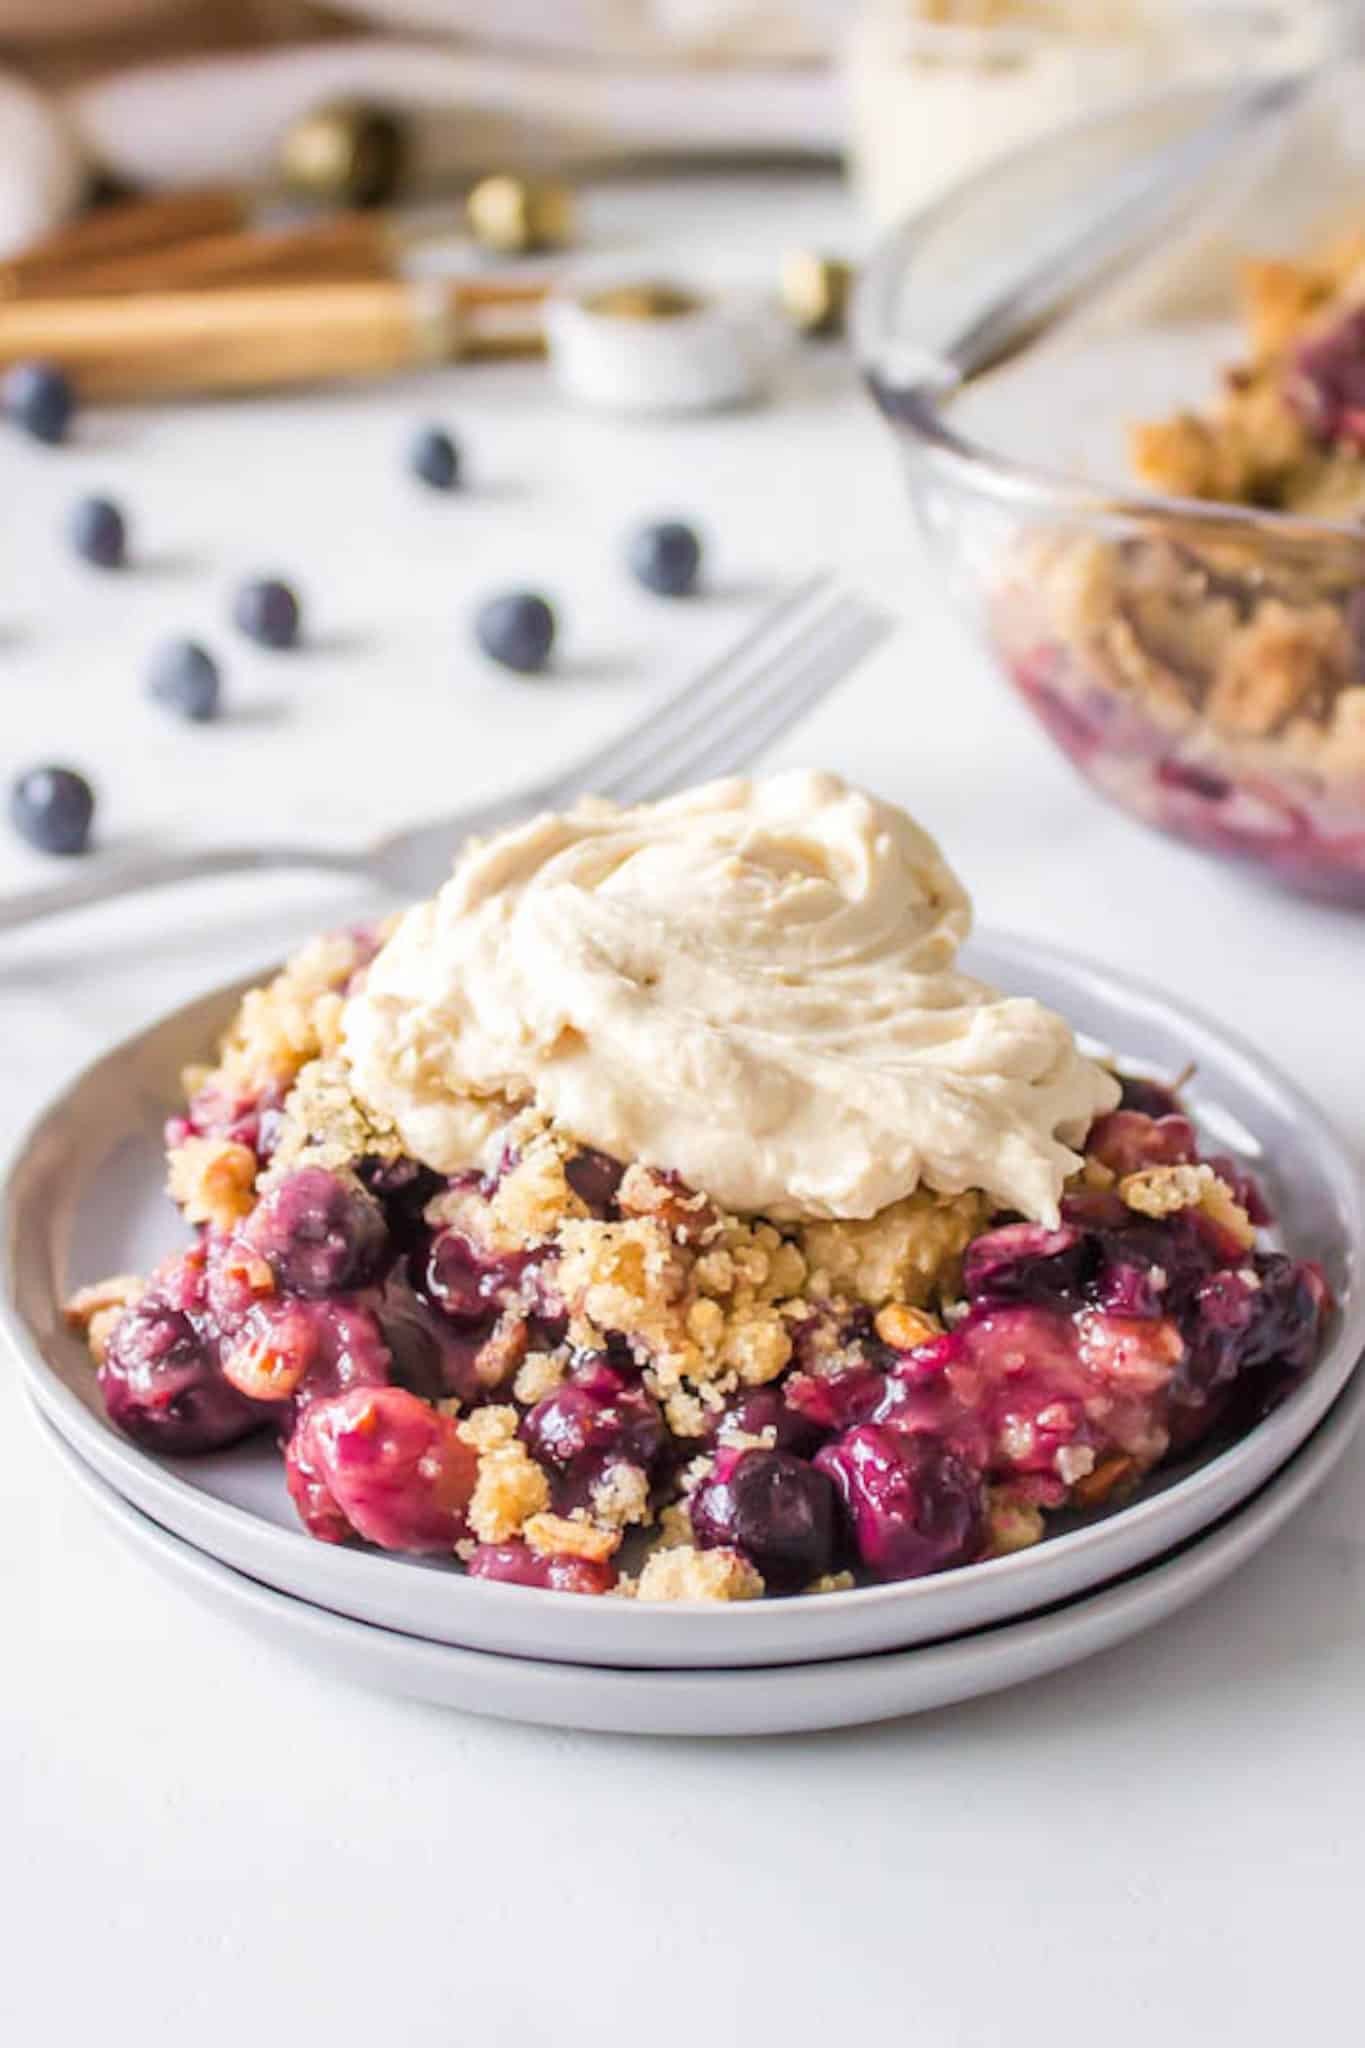 blueberry crisp served with a coconut whip topping.